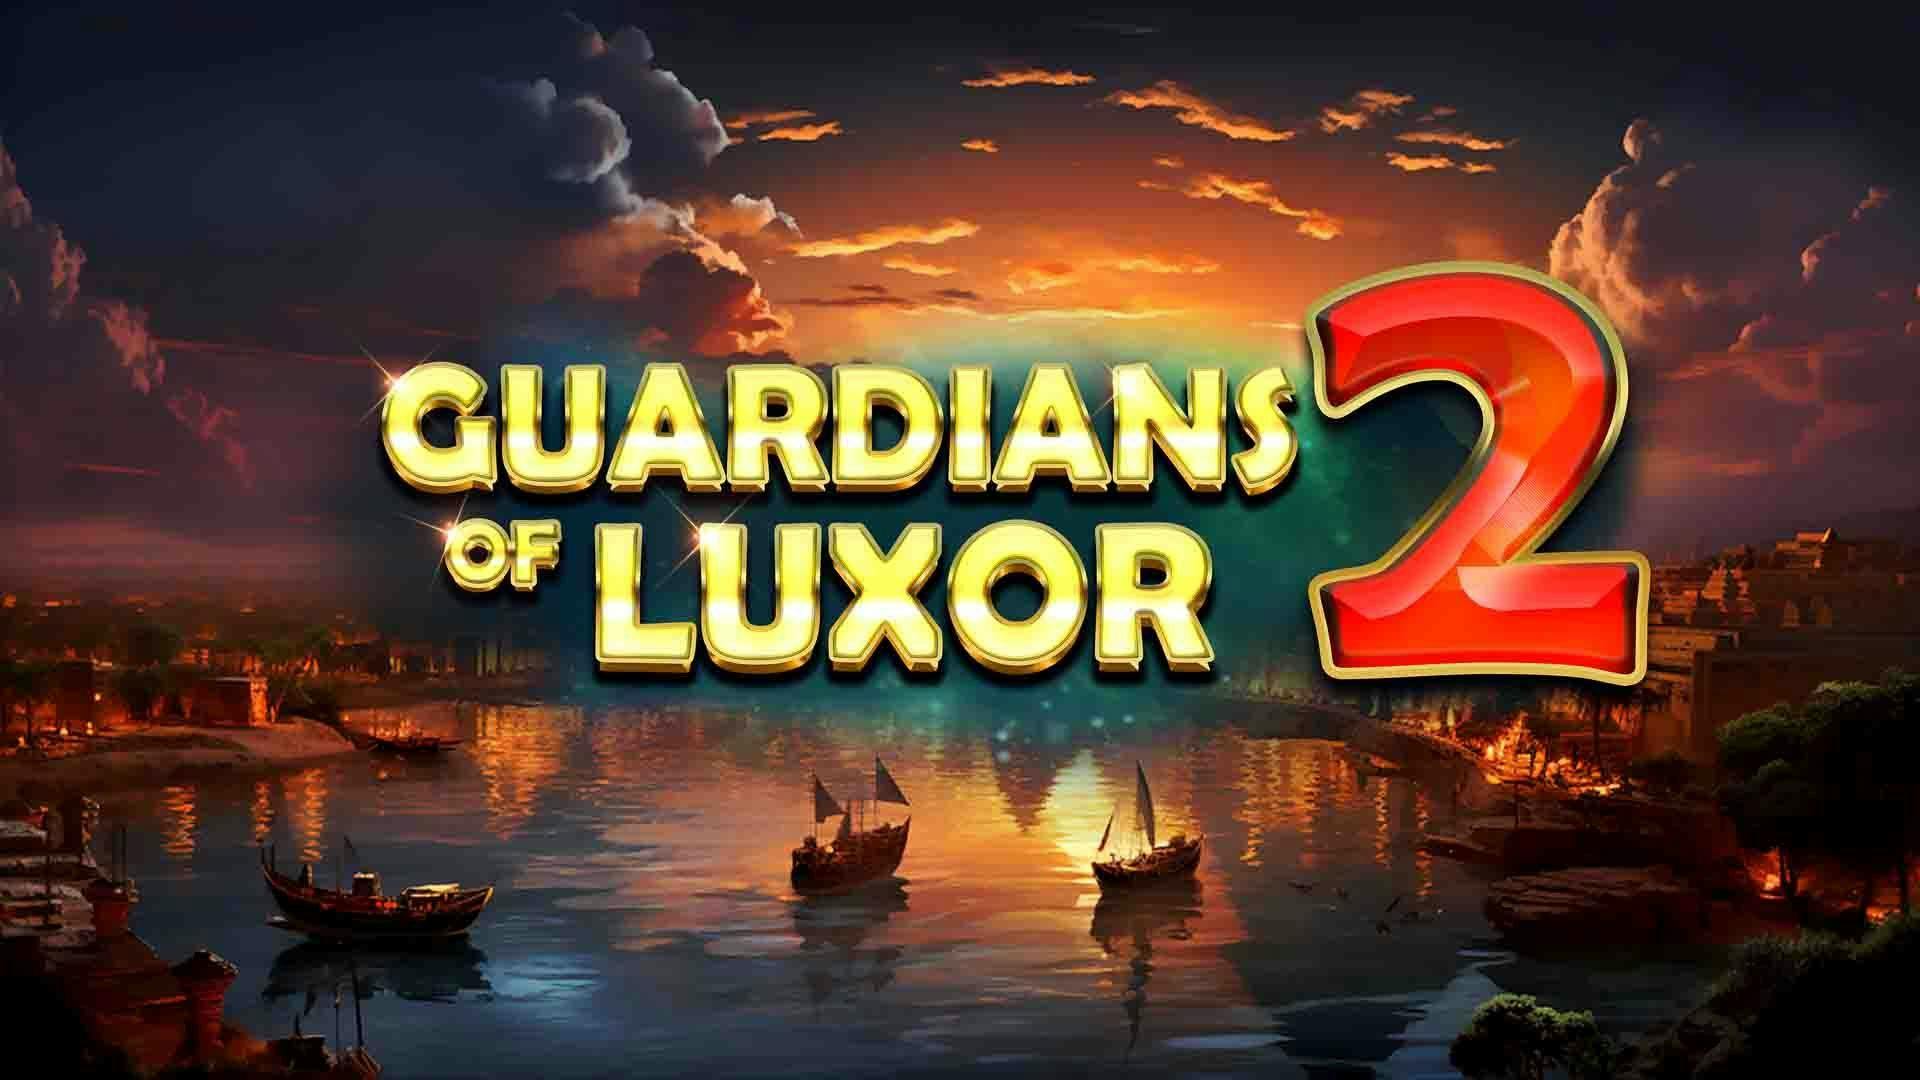 Guardians Of Luxor 2 Slot Machine Online Free Game Play